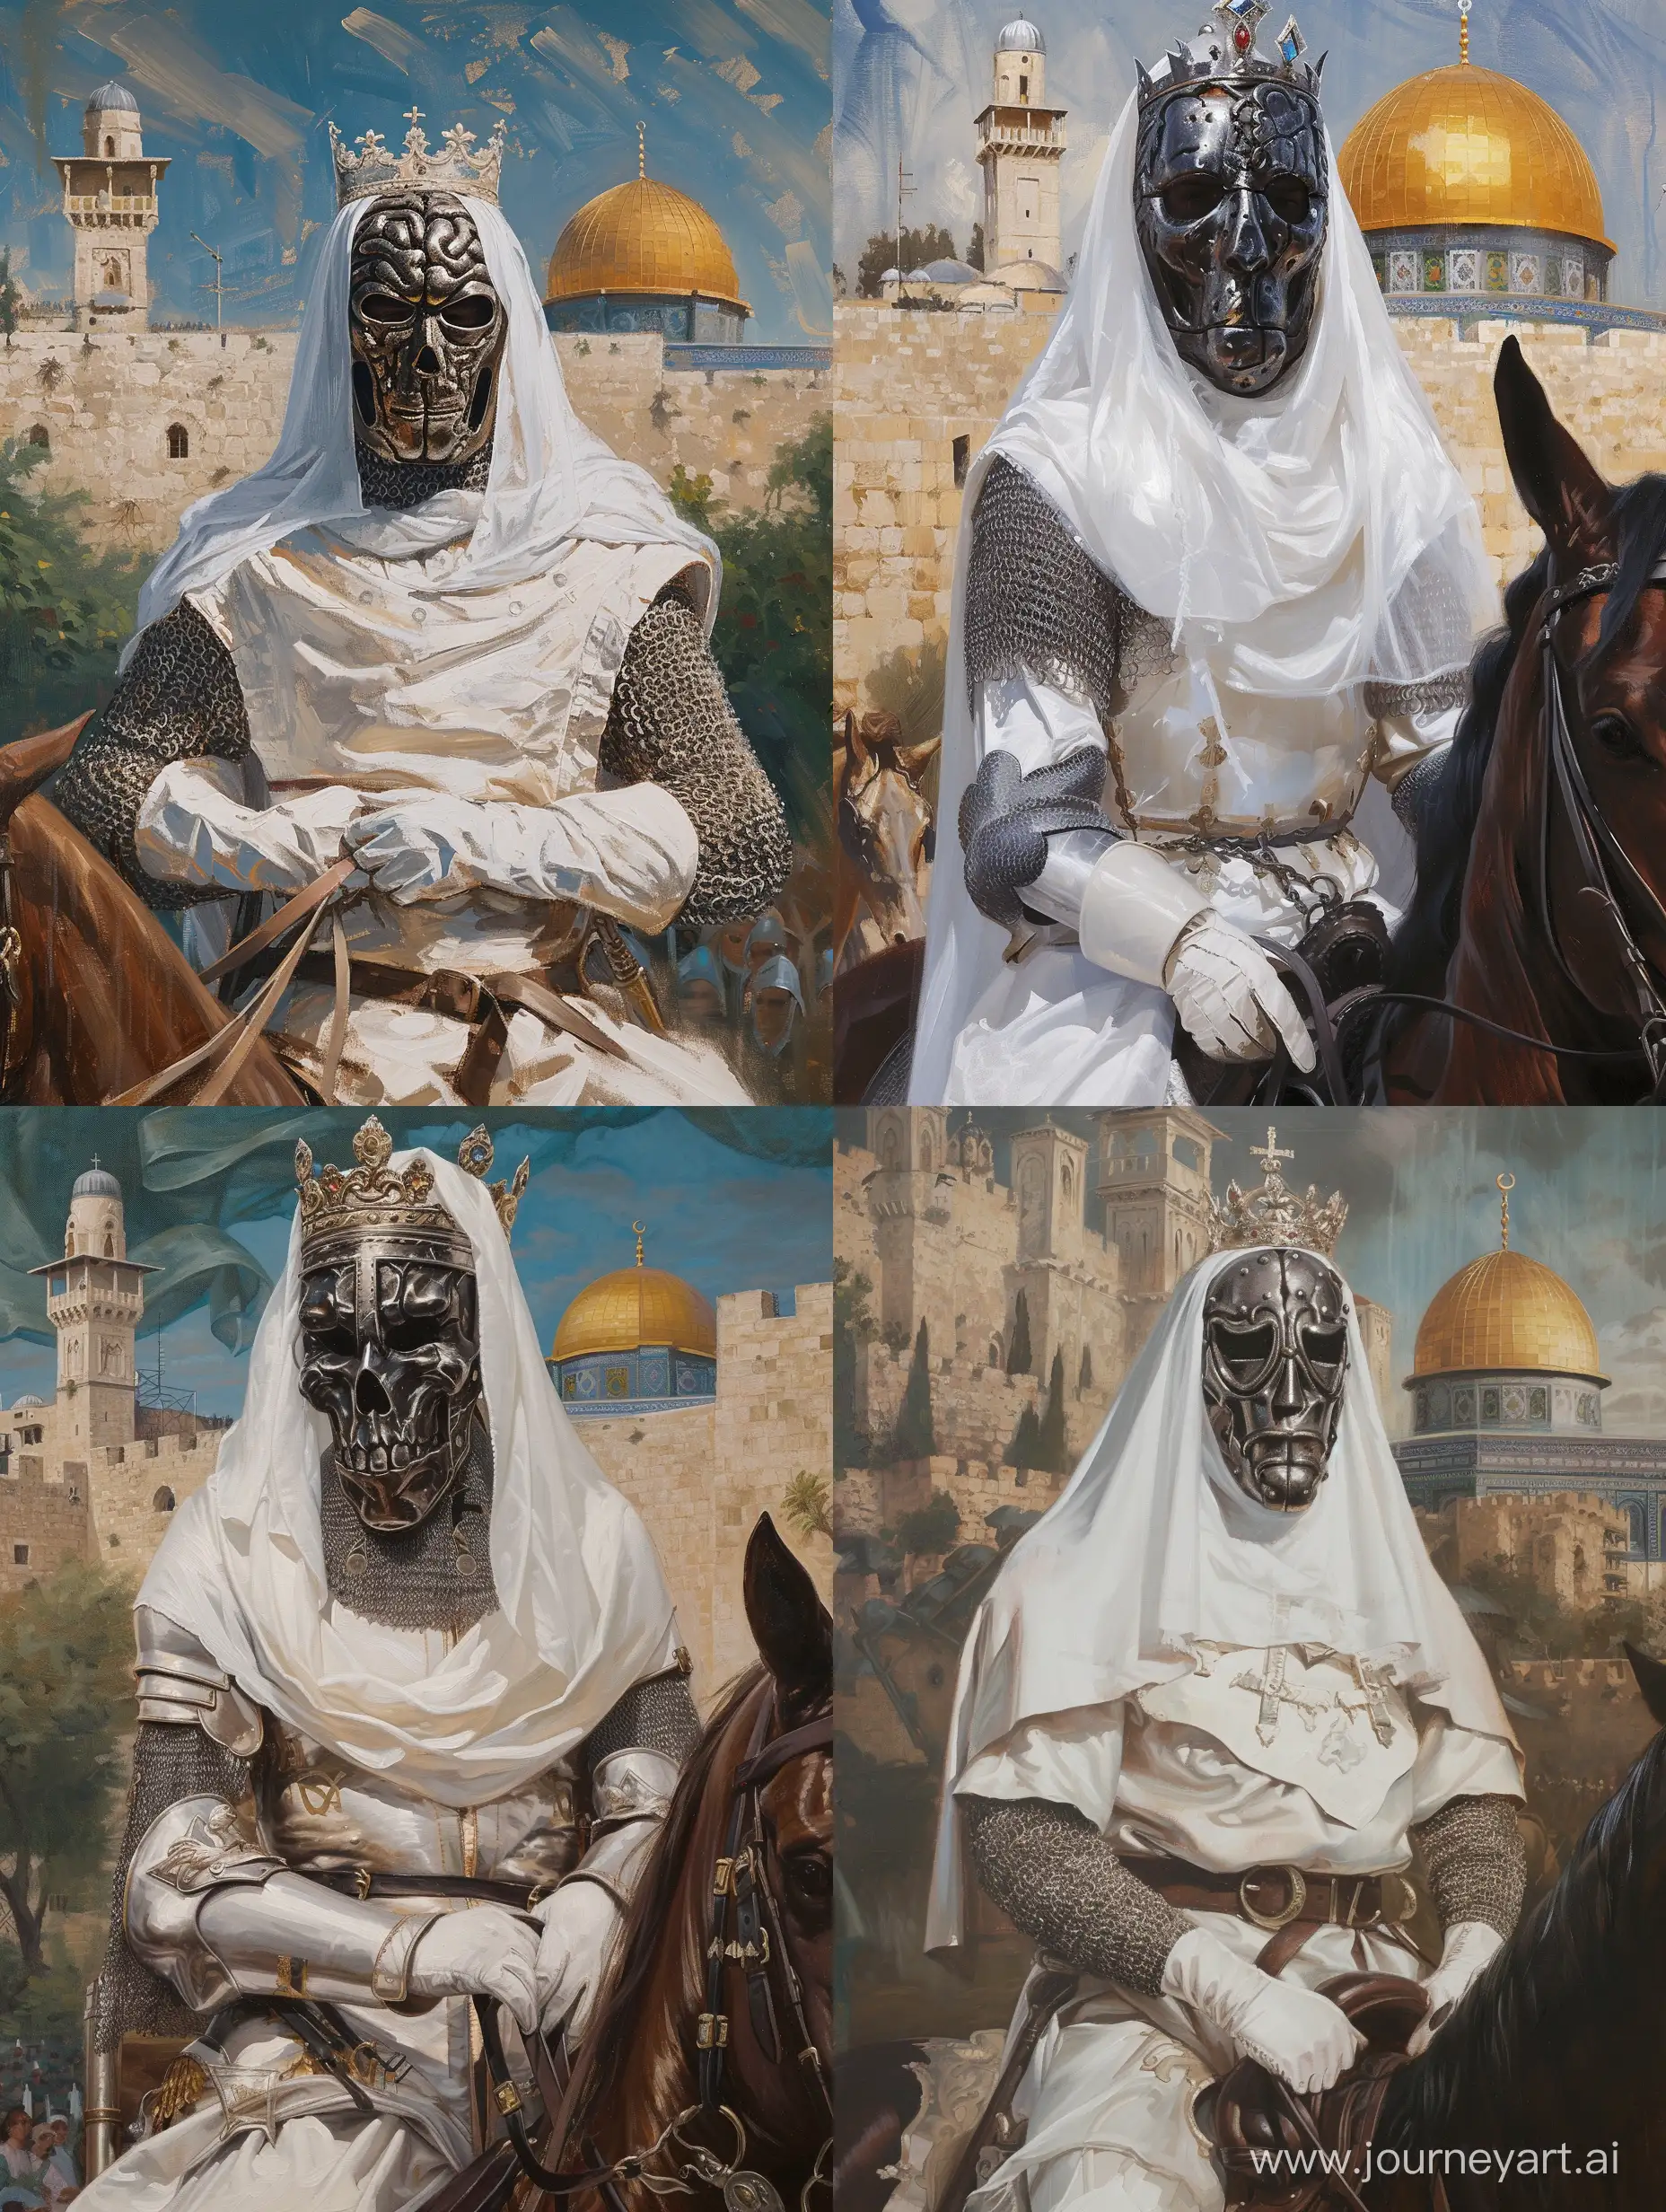 King Baldwin IV of Jerusalem. He is wearing white tabard over chainmail. Full face covering iron human face shaped mask. White veil and king crown. White silk gloves. He is on his horse. Jerusalem themed background. Oil painting. Brush strikes.